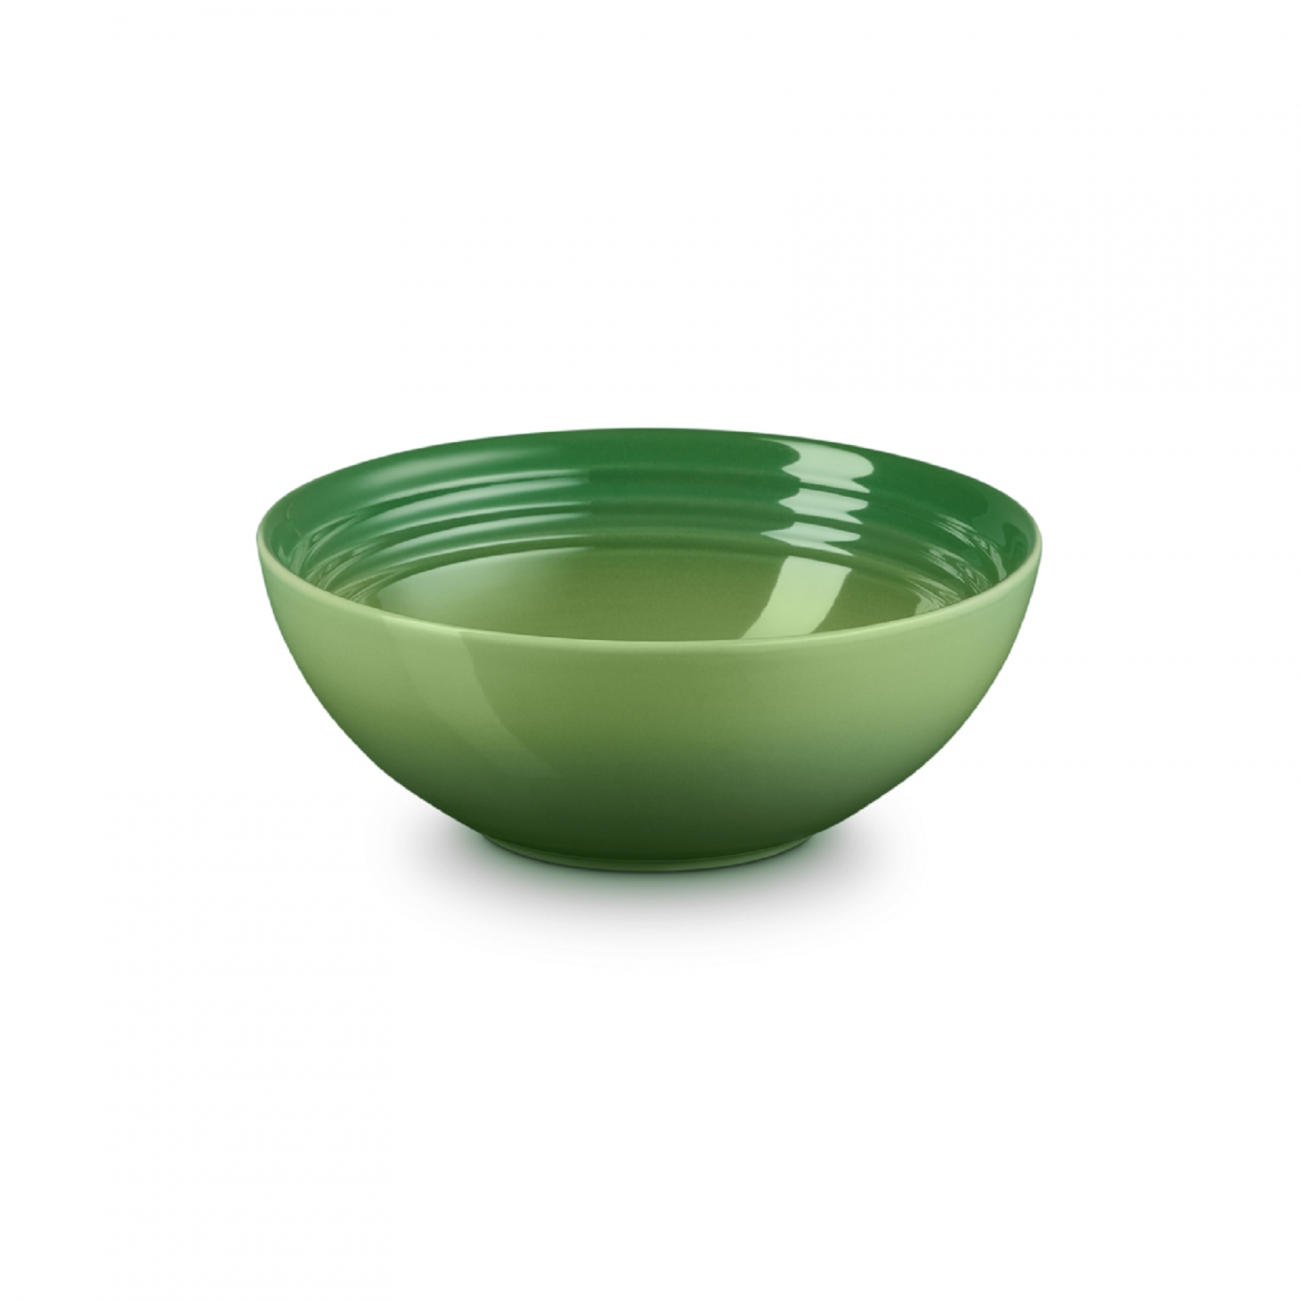 https://www.tattahome.com/83945-large_default/le-creuset-cereal-bowl-vancouver-bamboo.jpg